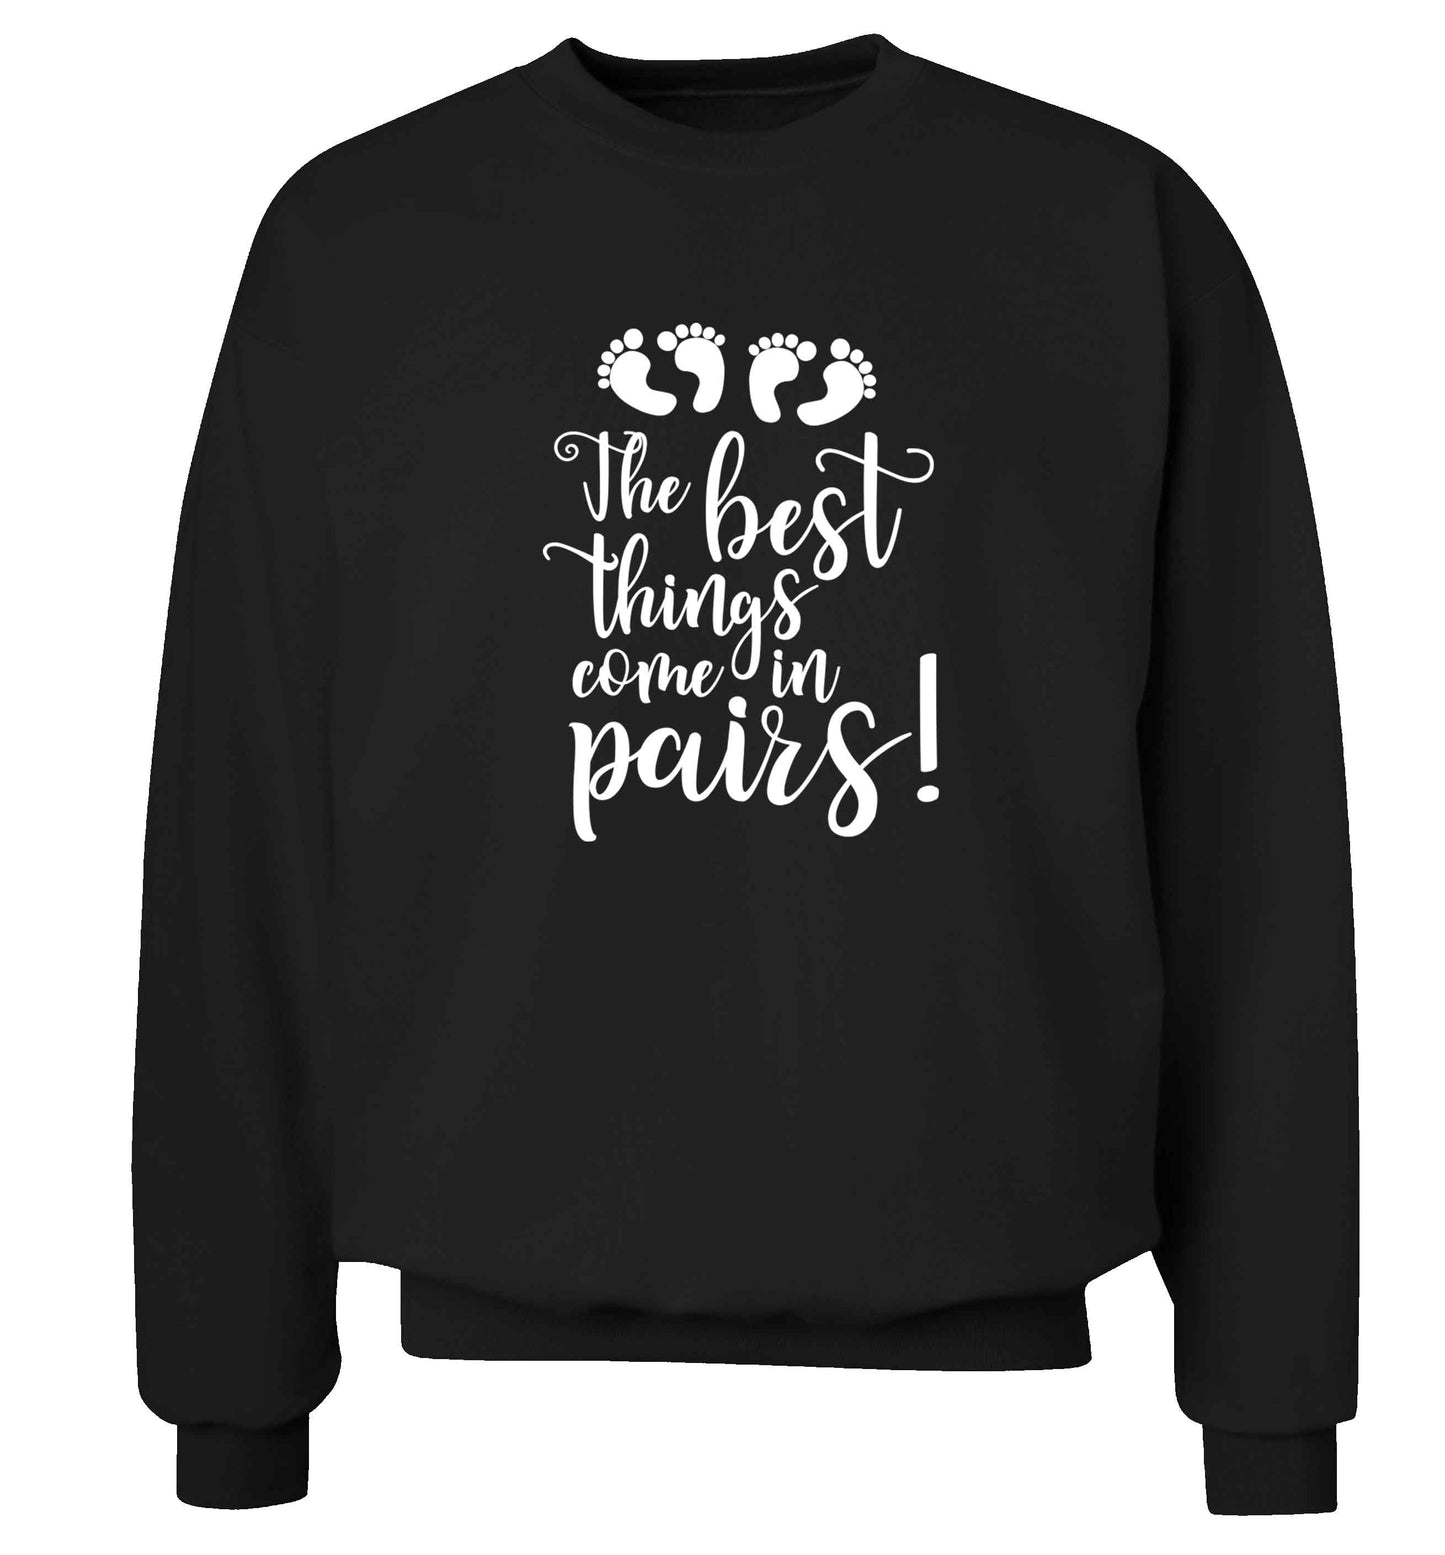 The best things come in pairs! adult's unisex black sweater 2XL